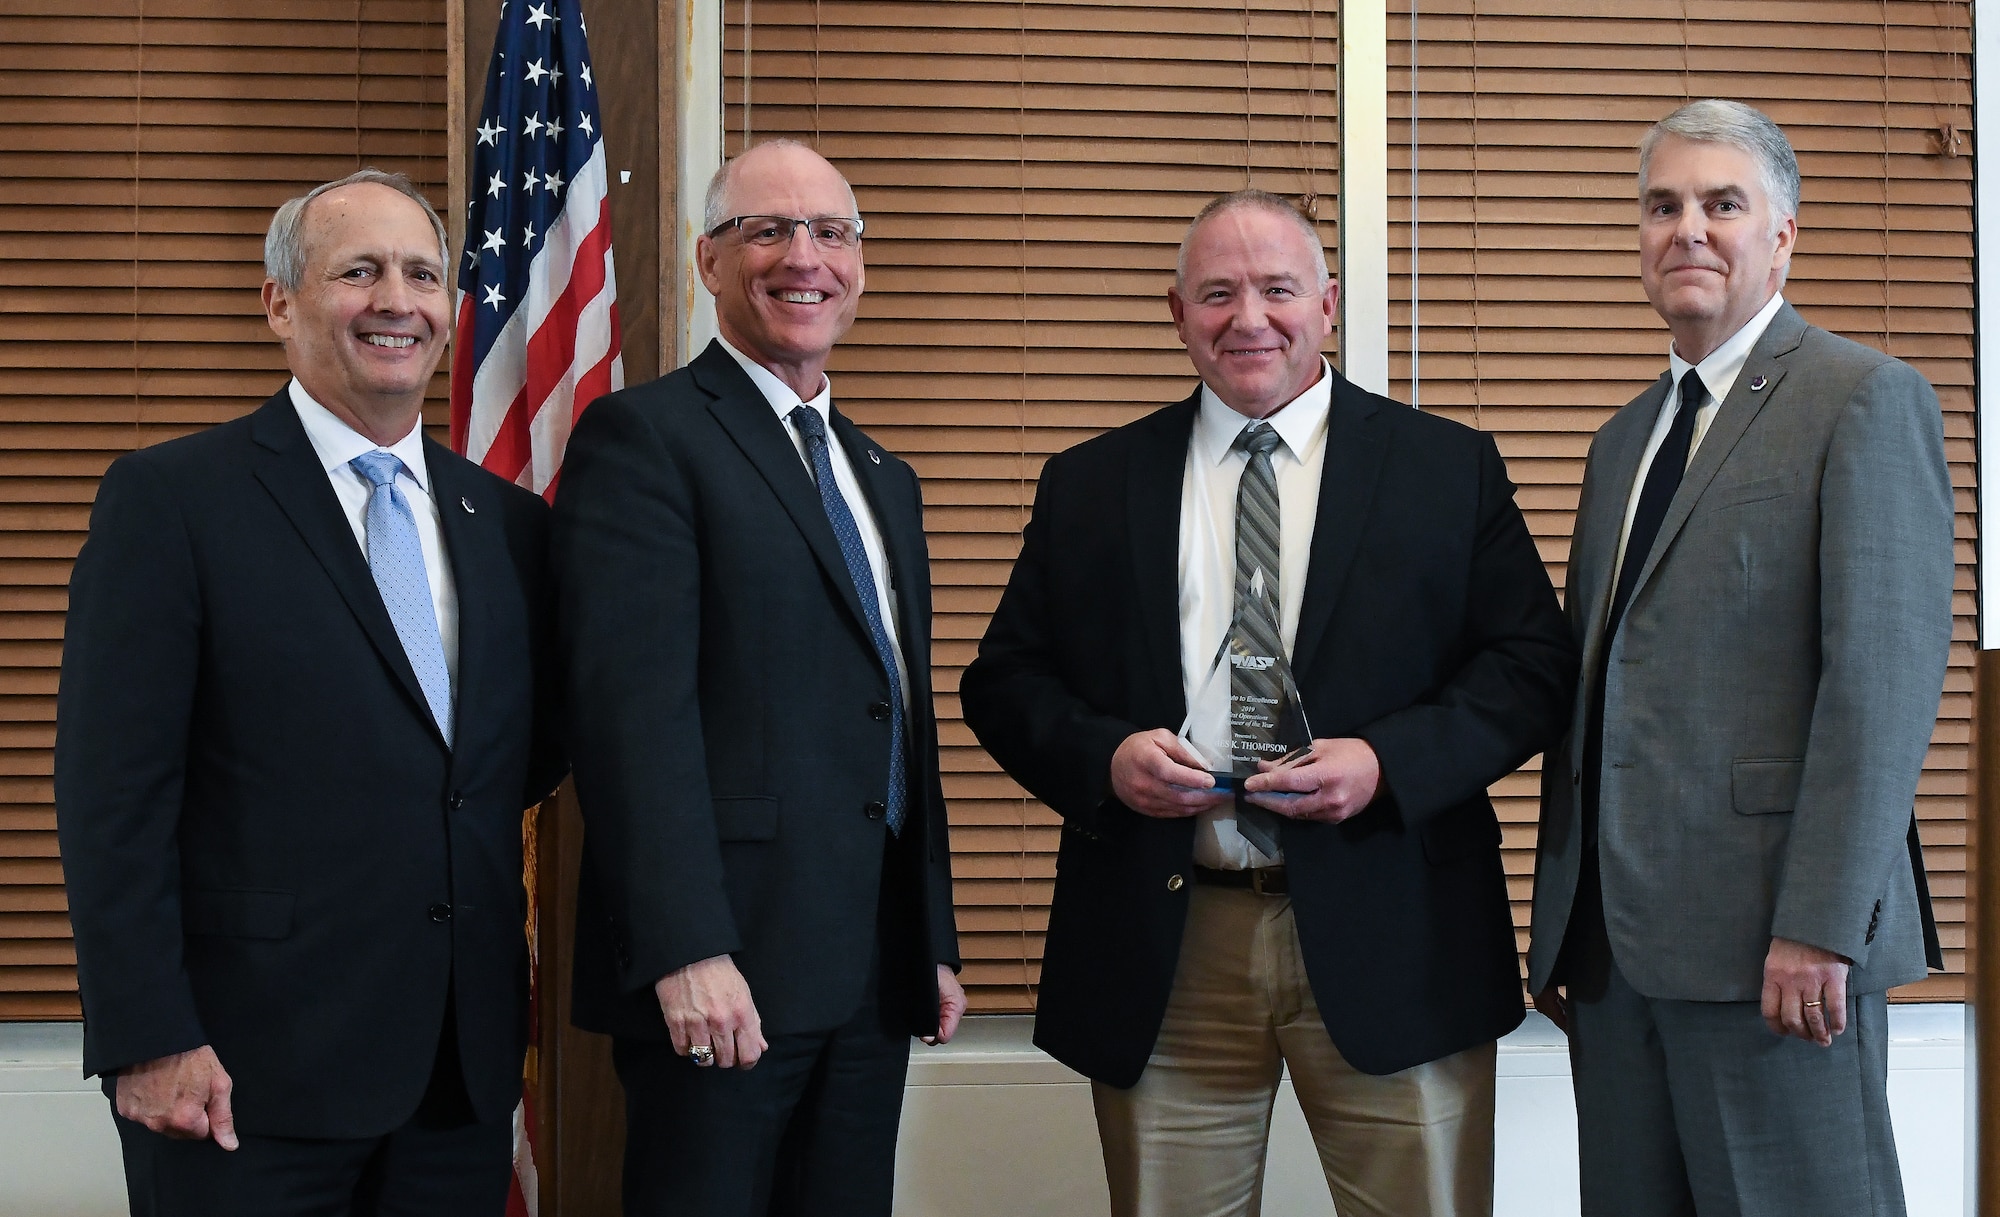 Test Operations Engineer III Kevin Thompson, third from left, receives the Test Operations Engineer of the Year award during the National Aerospace Solutions(NAS), LLC, Salute to Excellence Annual Awards Banquet, Nov. 5, 2019, at the Arnold Lakeside Center, Arnold Air Force Base, Tenn. Also pictured, from left, is NAS Deputy General Manager Michael Belzil, NAS General Manager Dr. Richard Tighe and NAS Mission Execution Director Jeff Henderson. (U.S. Air Force photo by Jill Pickett)